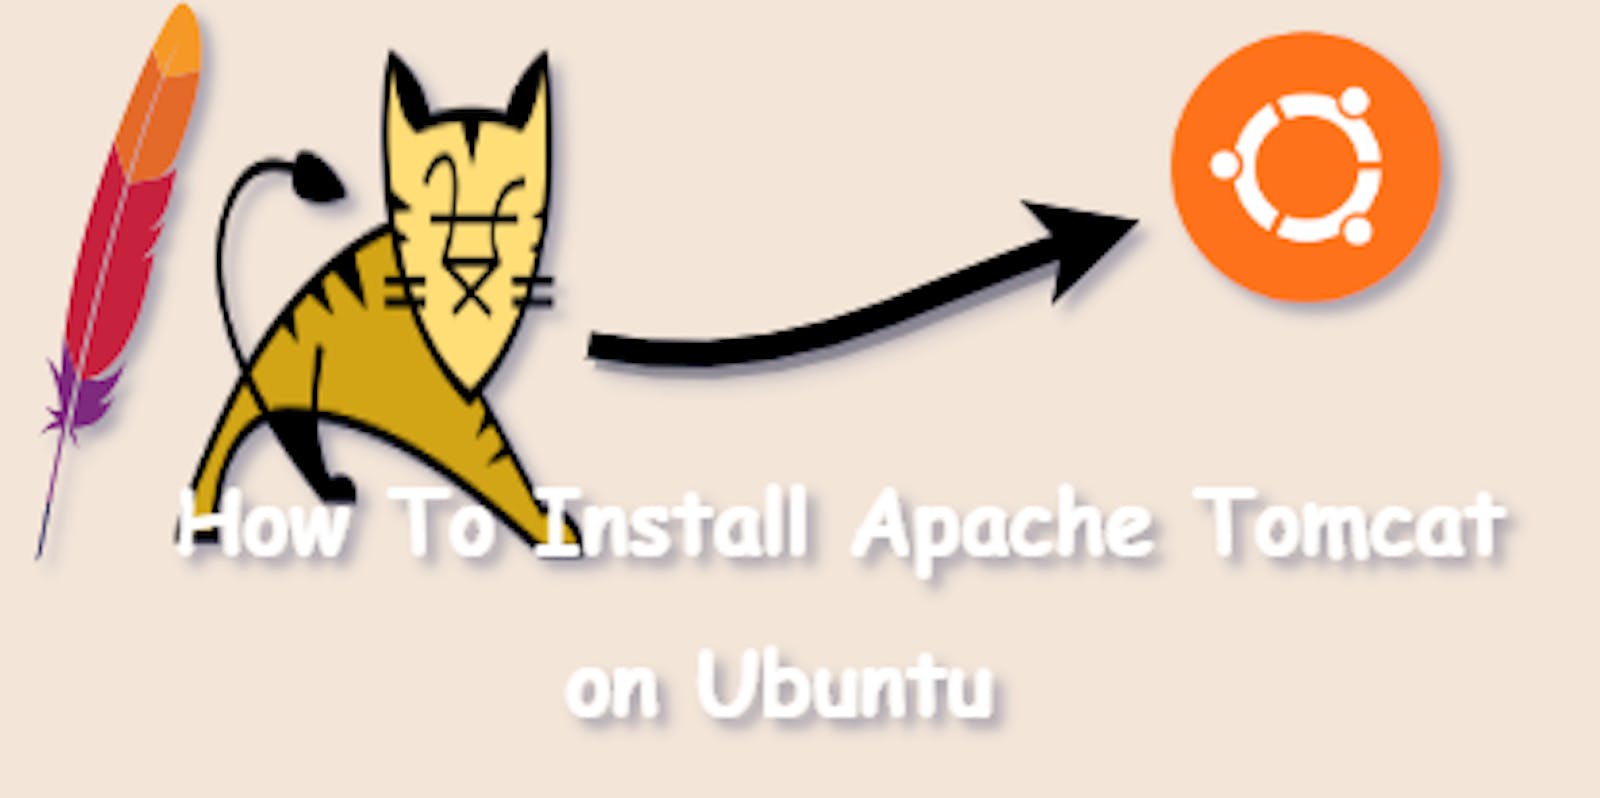 A Step-by-Step Guide to Installing Apache Tomcat on Ubuntu